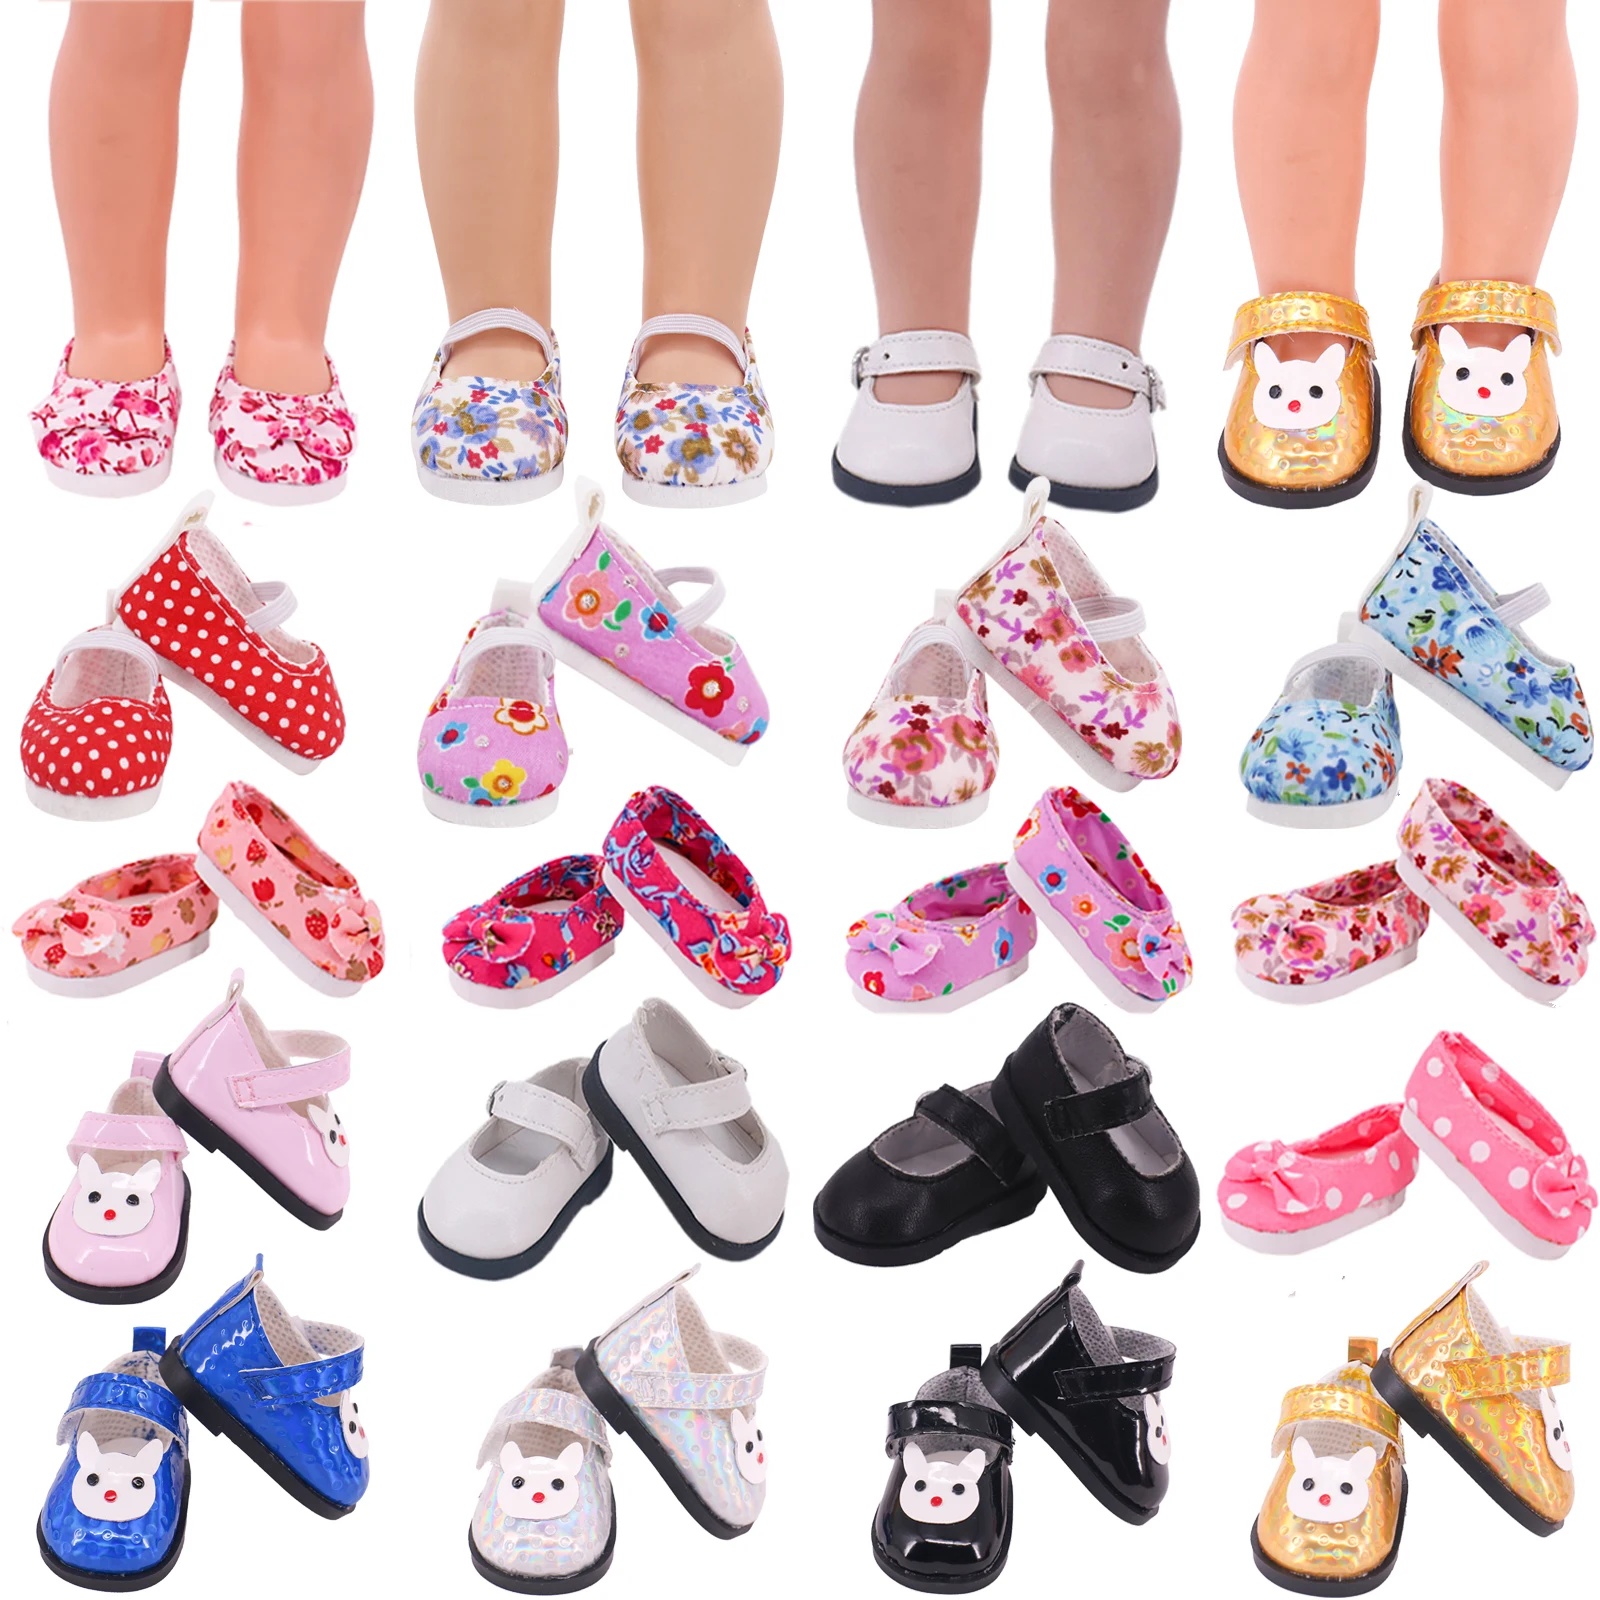 Cute 5Cm Doll Shoes Paola Reina Wellie Wisher Floral&Pu Shoes For 14.5 Inch Doll&EXO&Blythe Doll Accessories Girl DIY Toys 5cm doll shoes blythe wellie wisher shoes for 14 5 inch doll